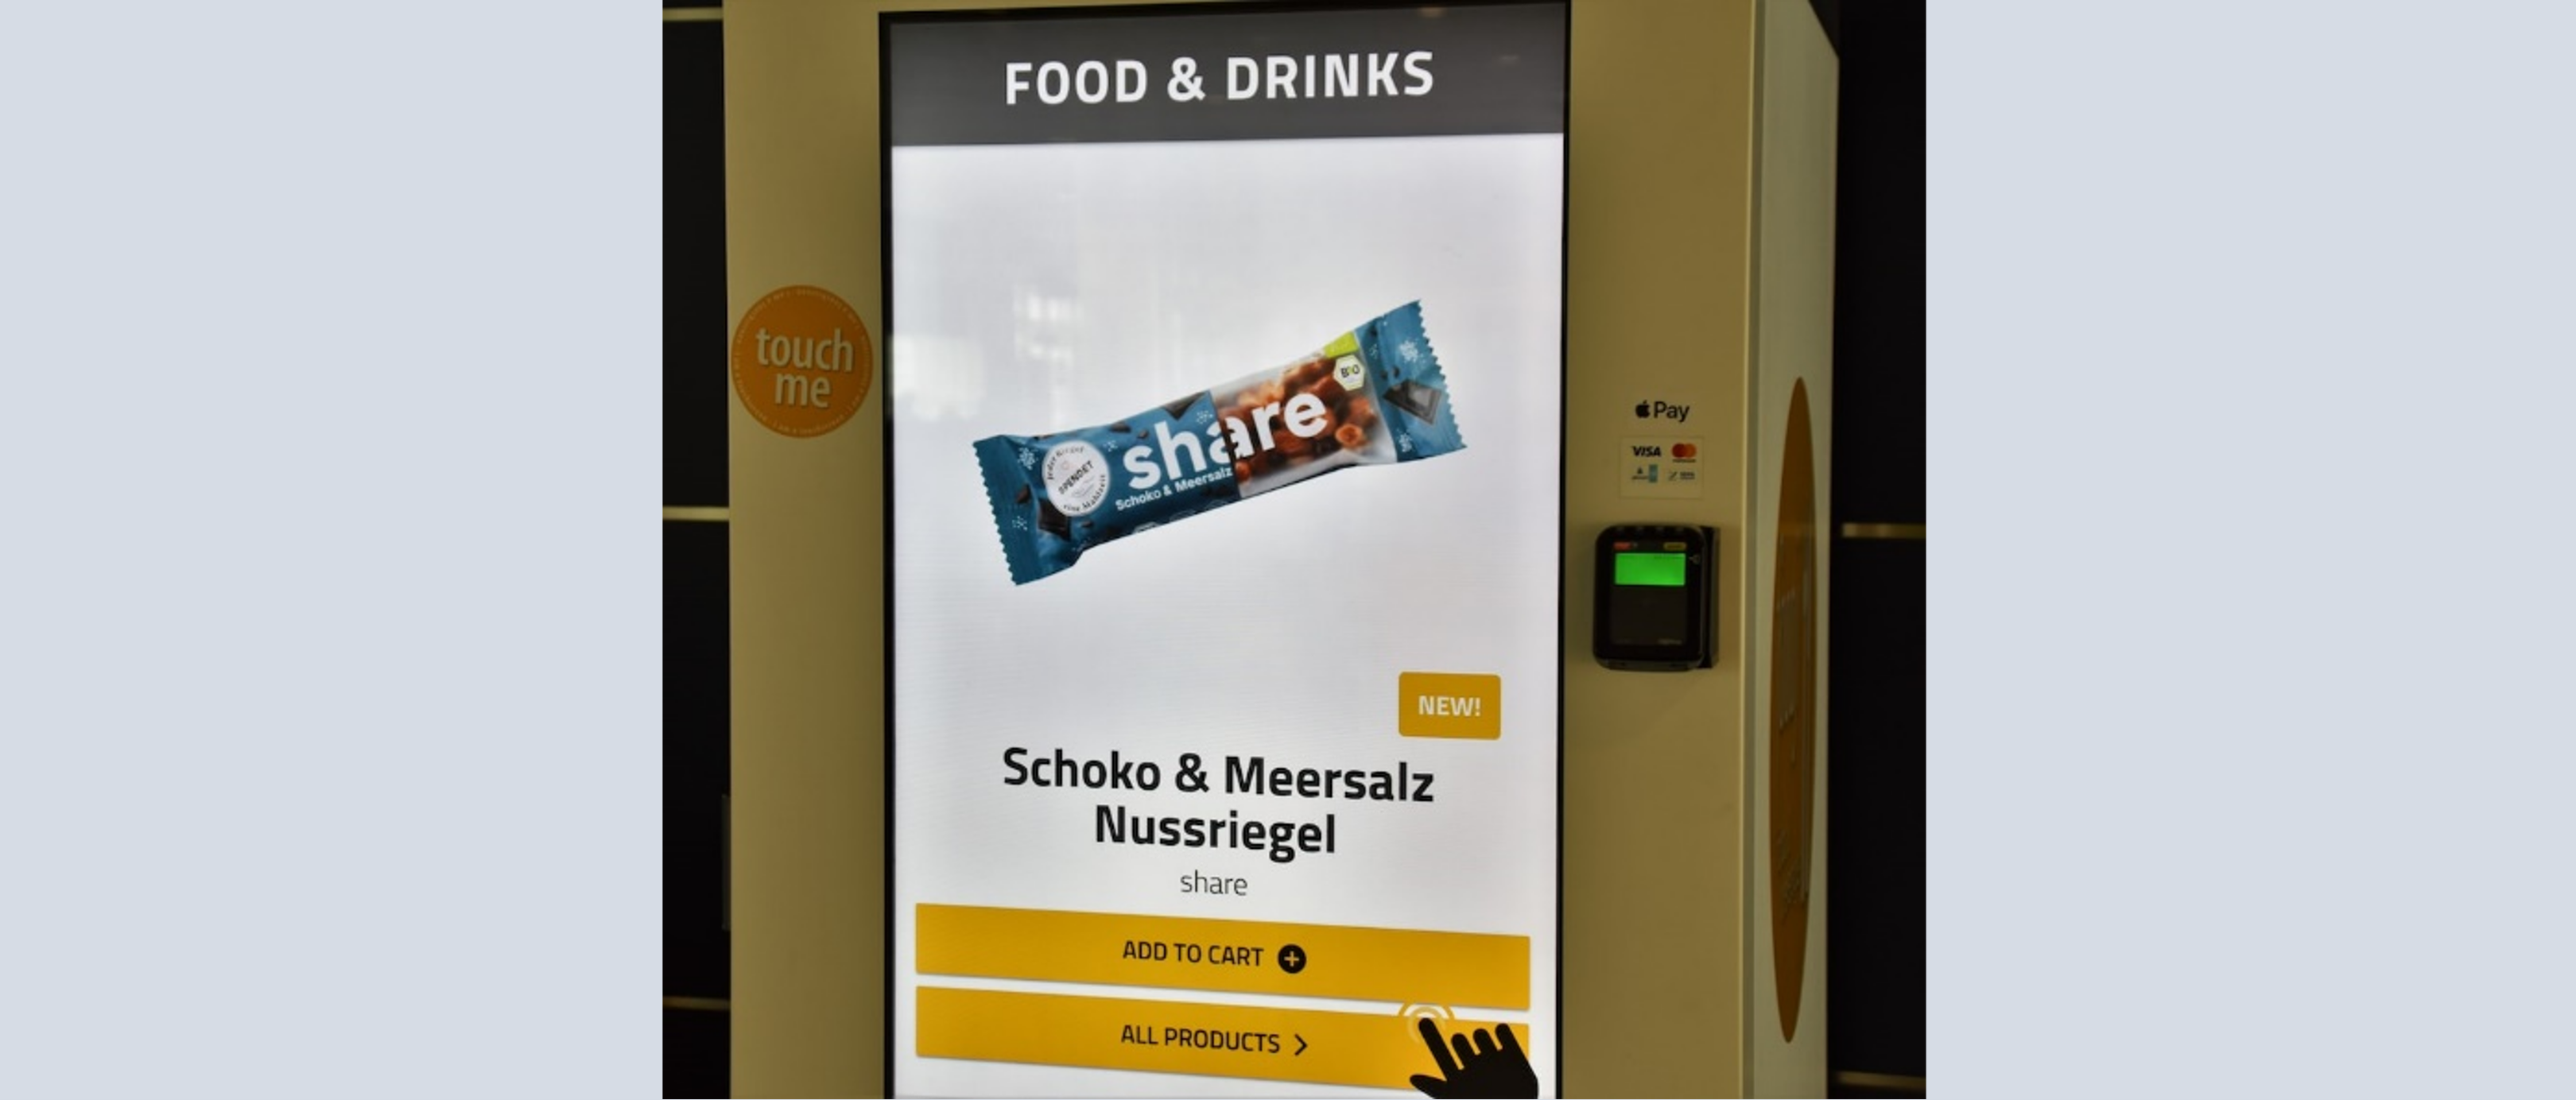 Vending machine at the airport